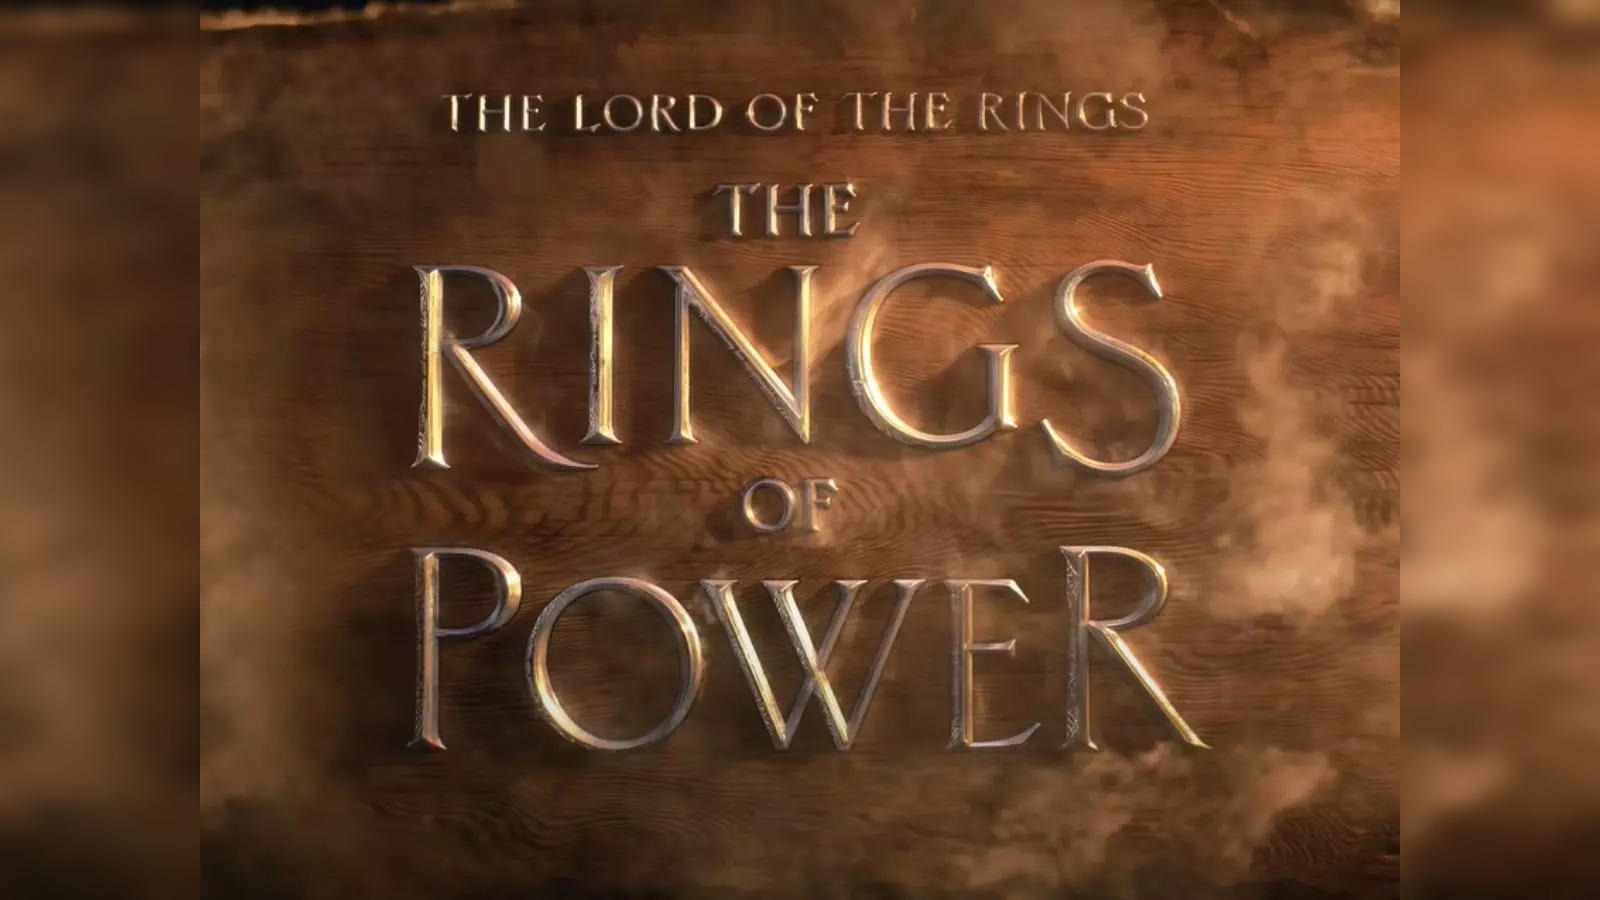 Before 'The Lord Of The Rings' web series hits OTT, a look back at